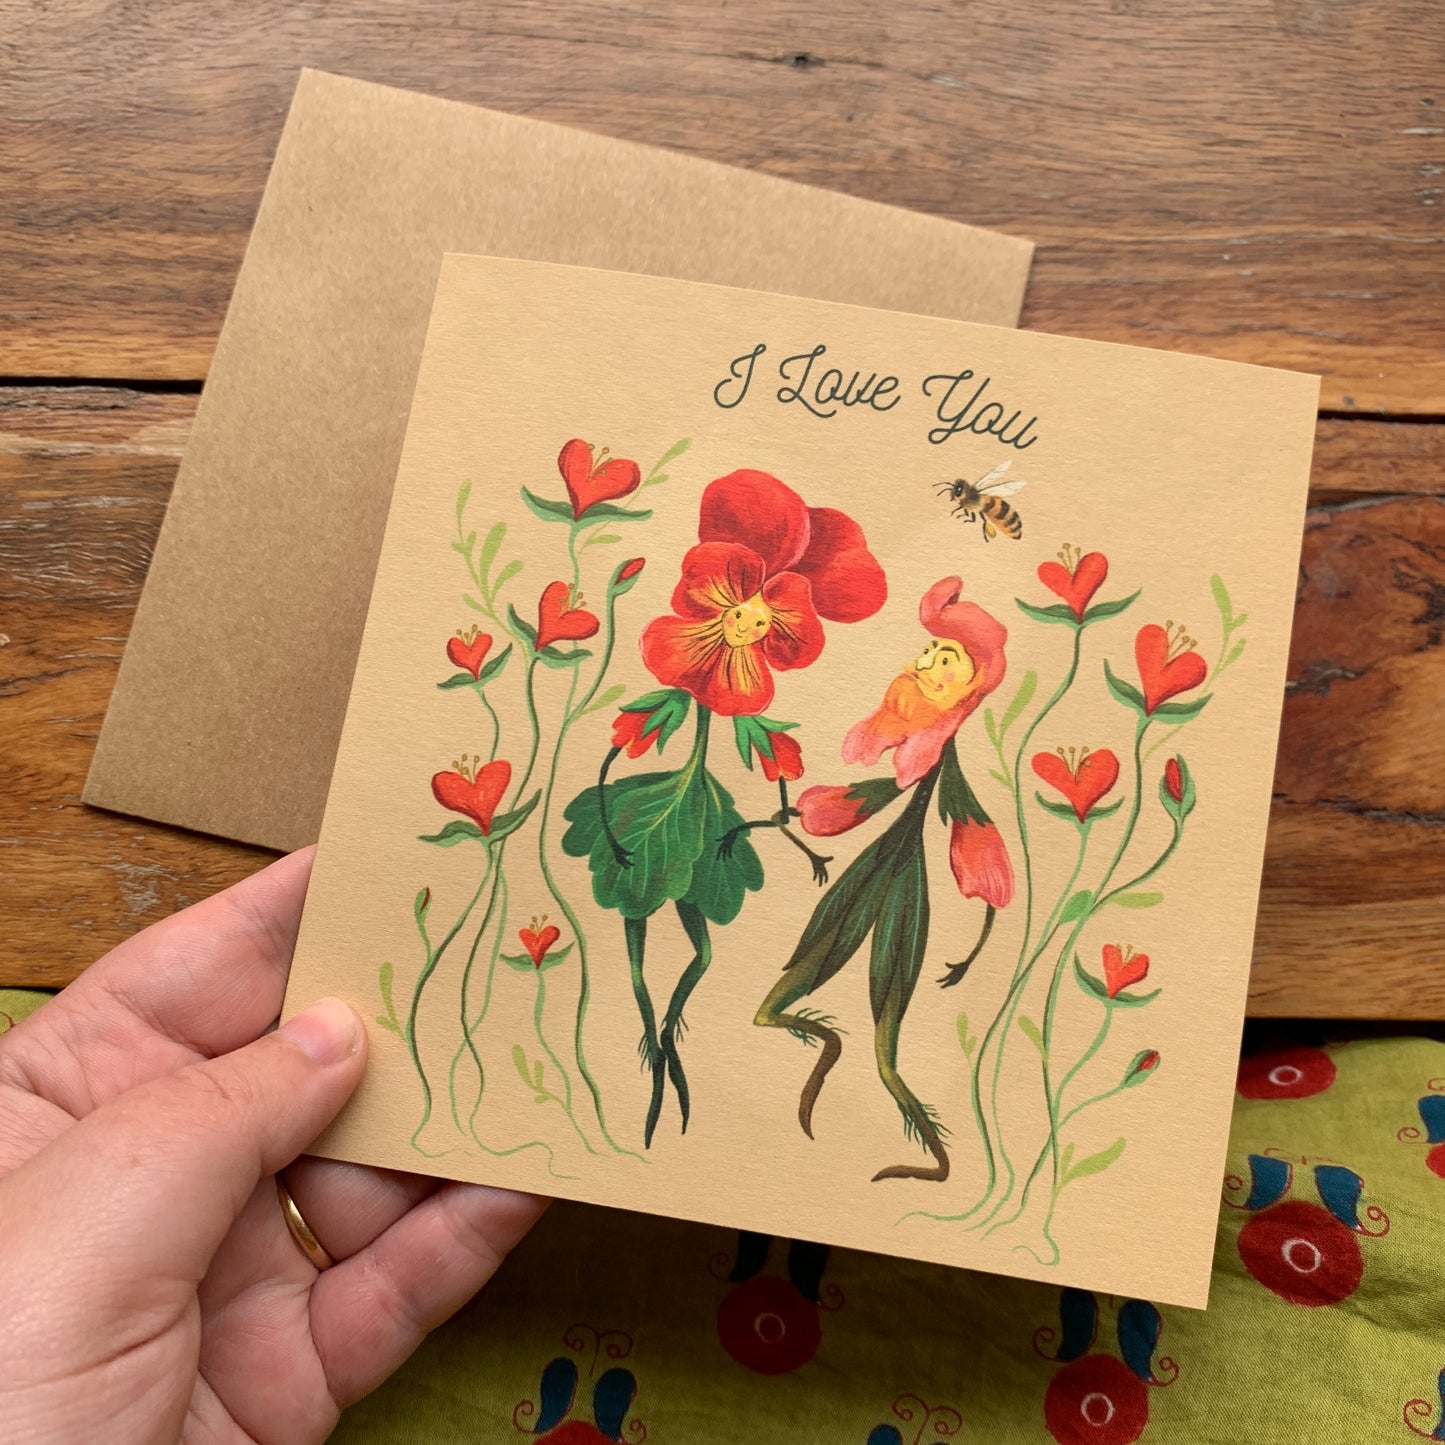 Anna Seed Art | Occasion Card - i love you. Cute flower illustration